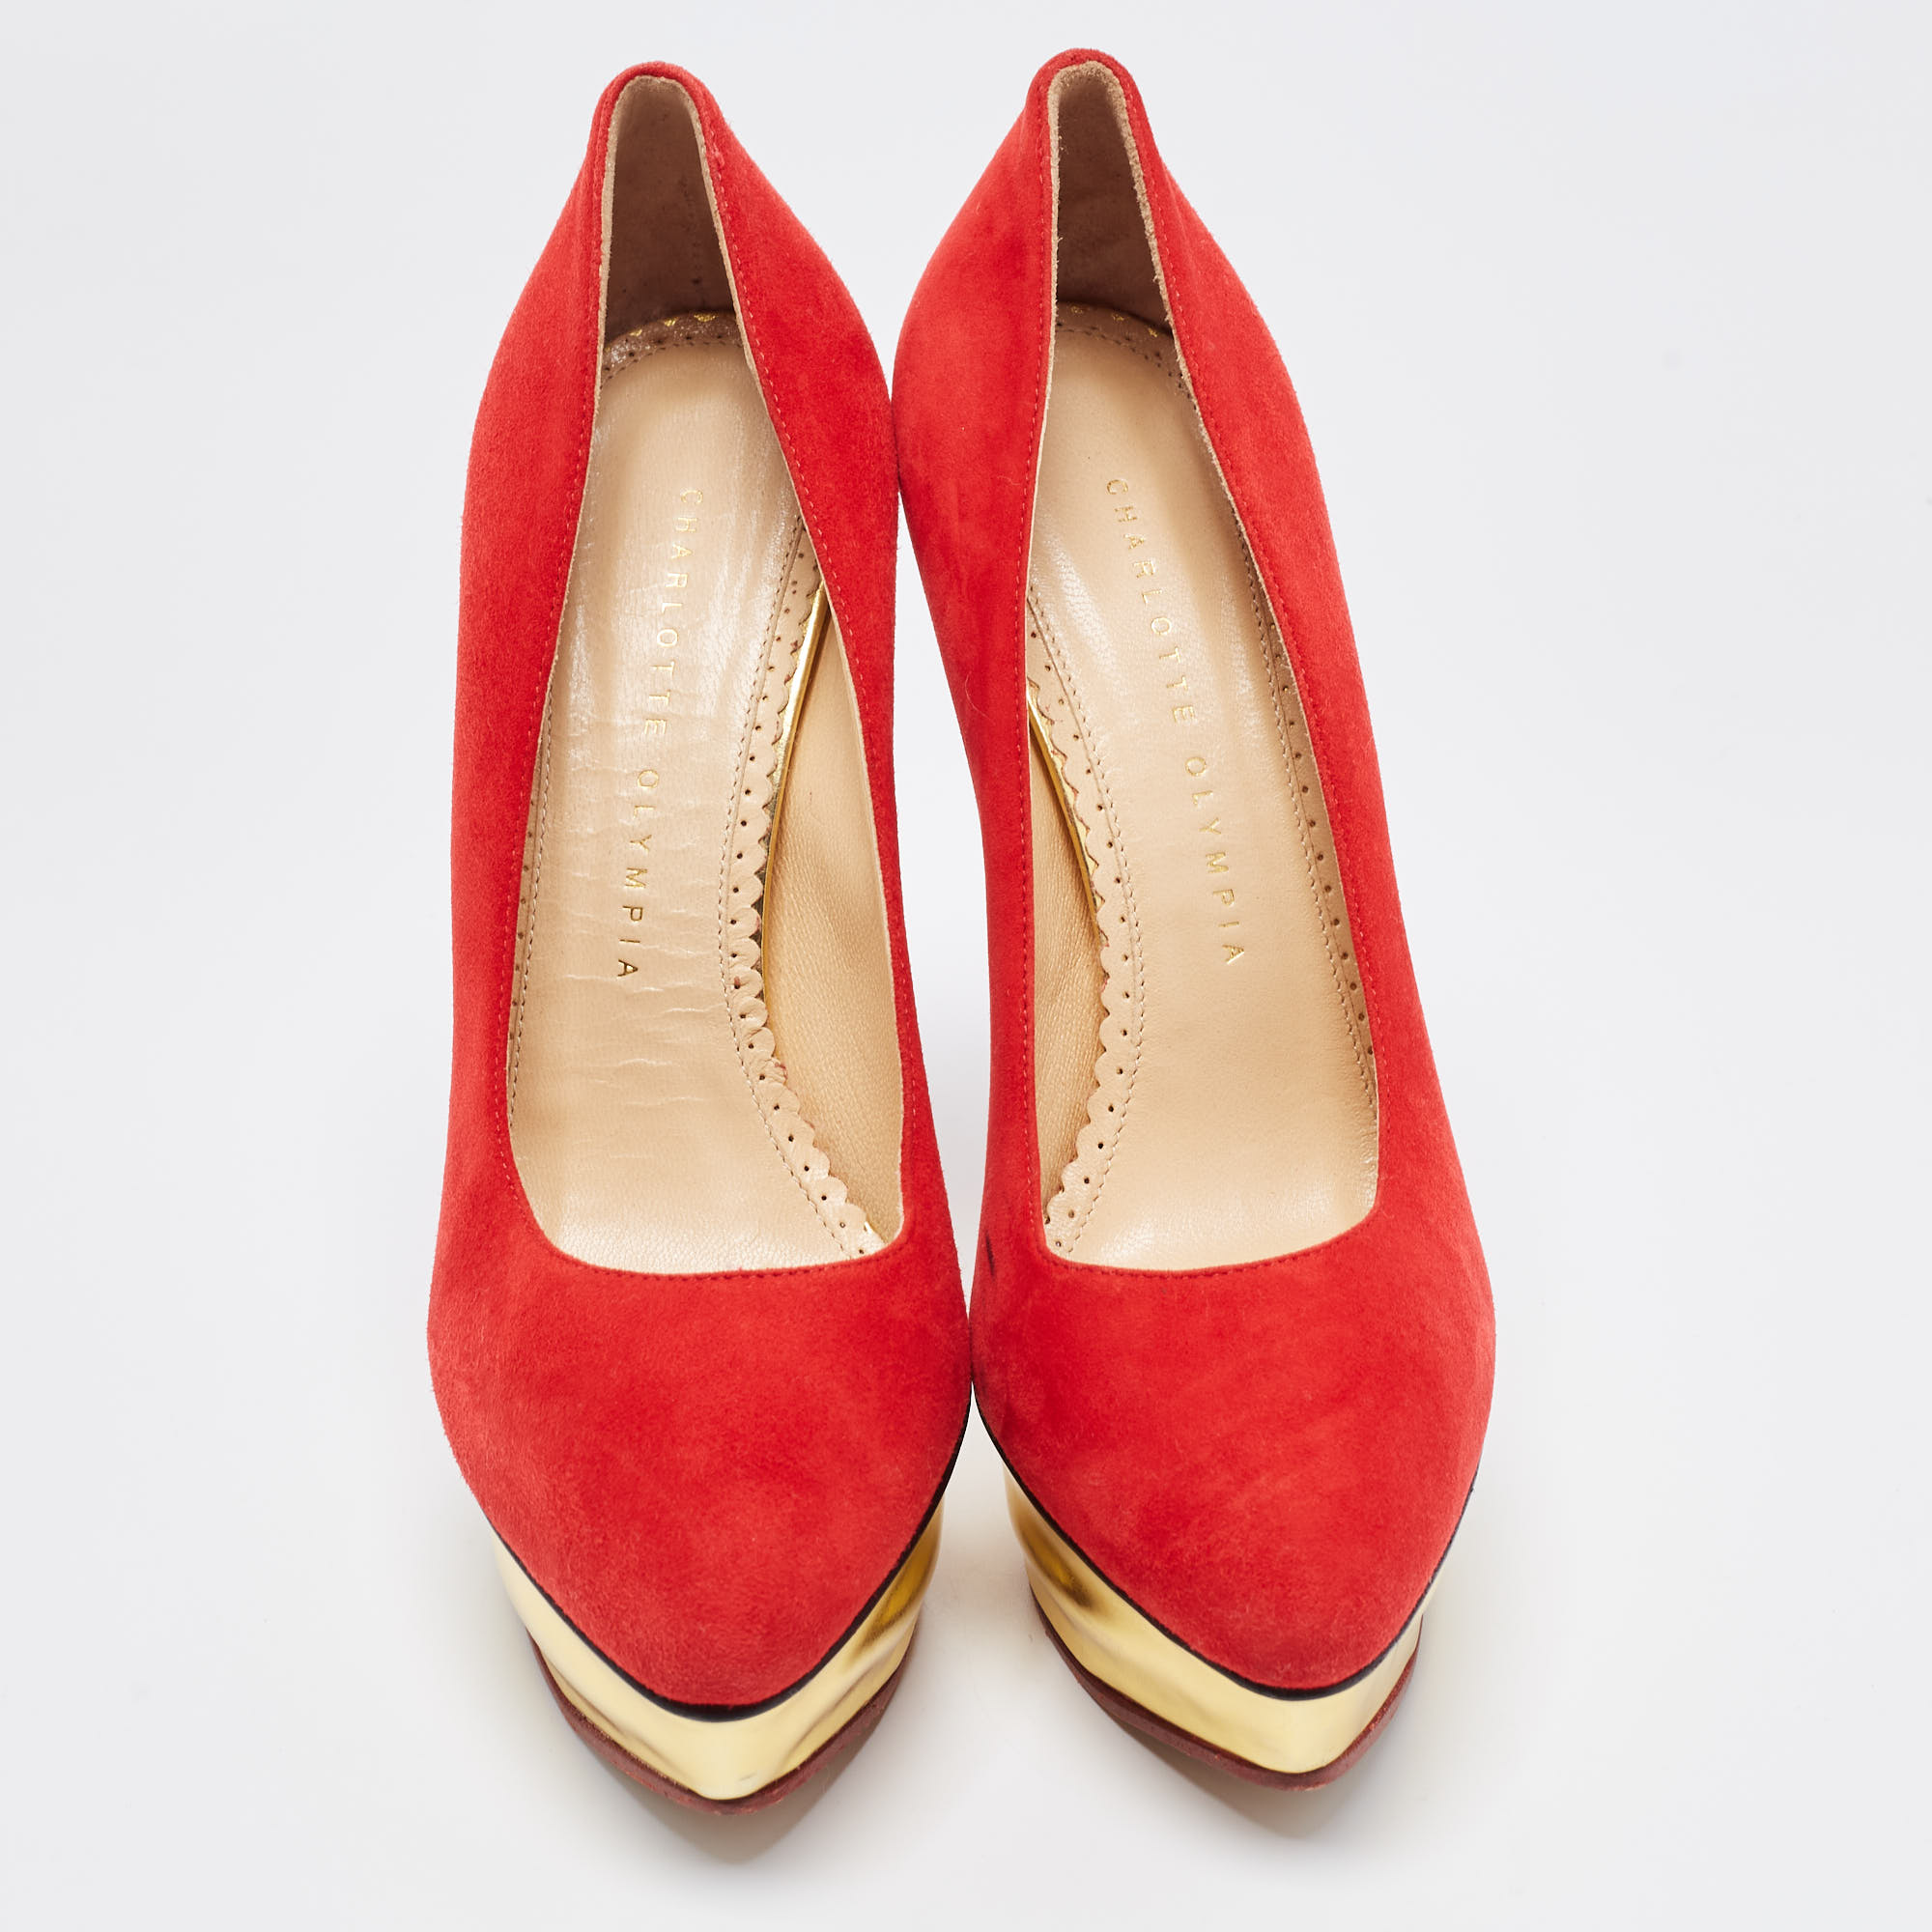 Charlotte Olympia Red Suede Dolly Platform Pumps Size 38.5